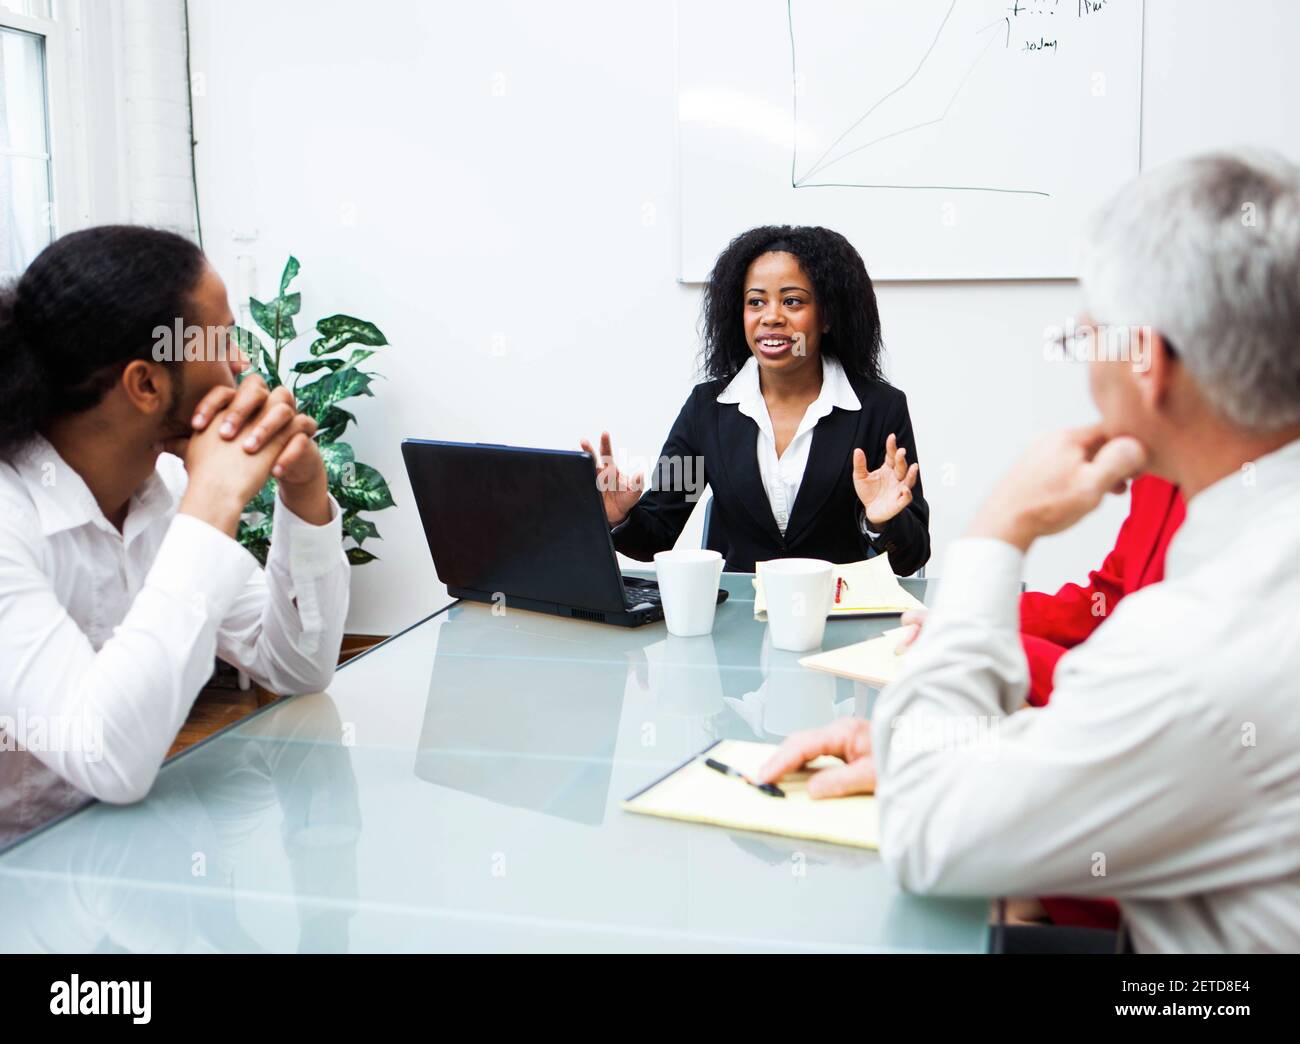 Business team having a meeting in an office. Stock Photo